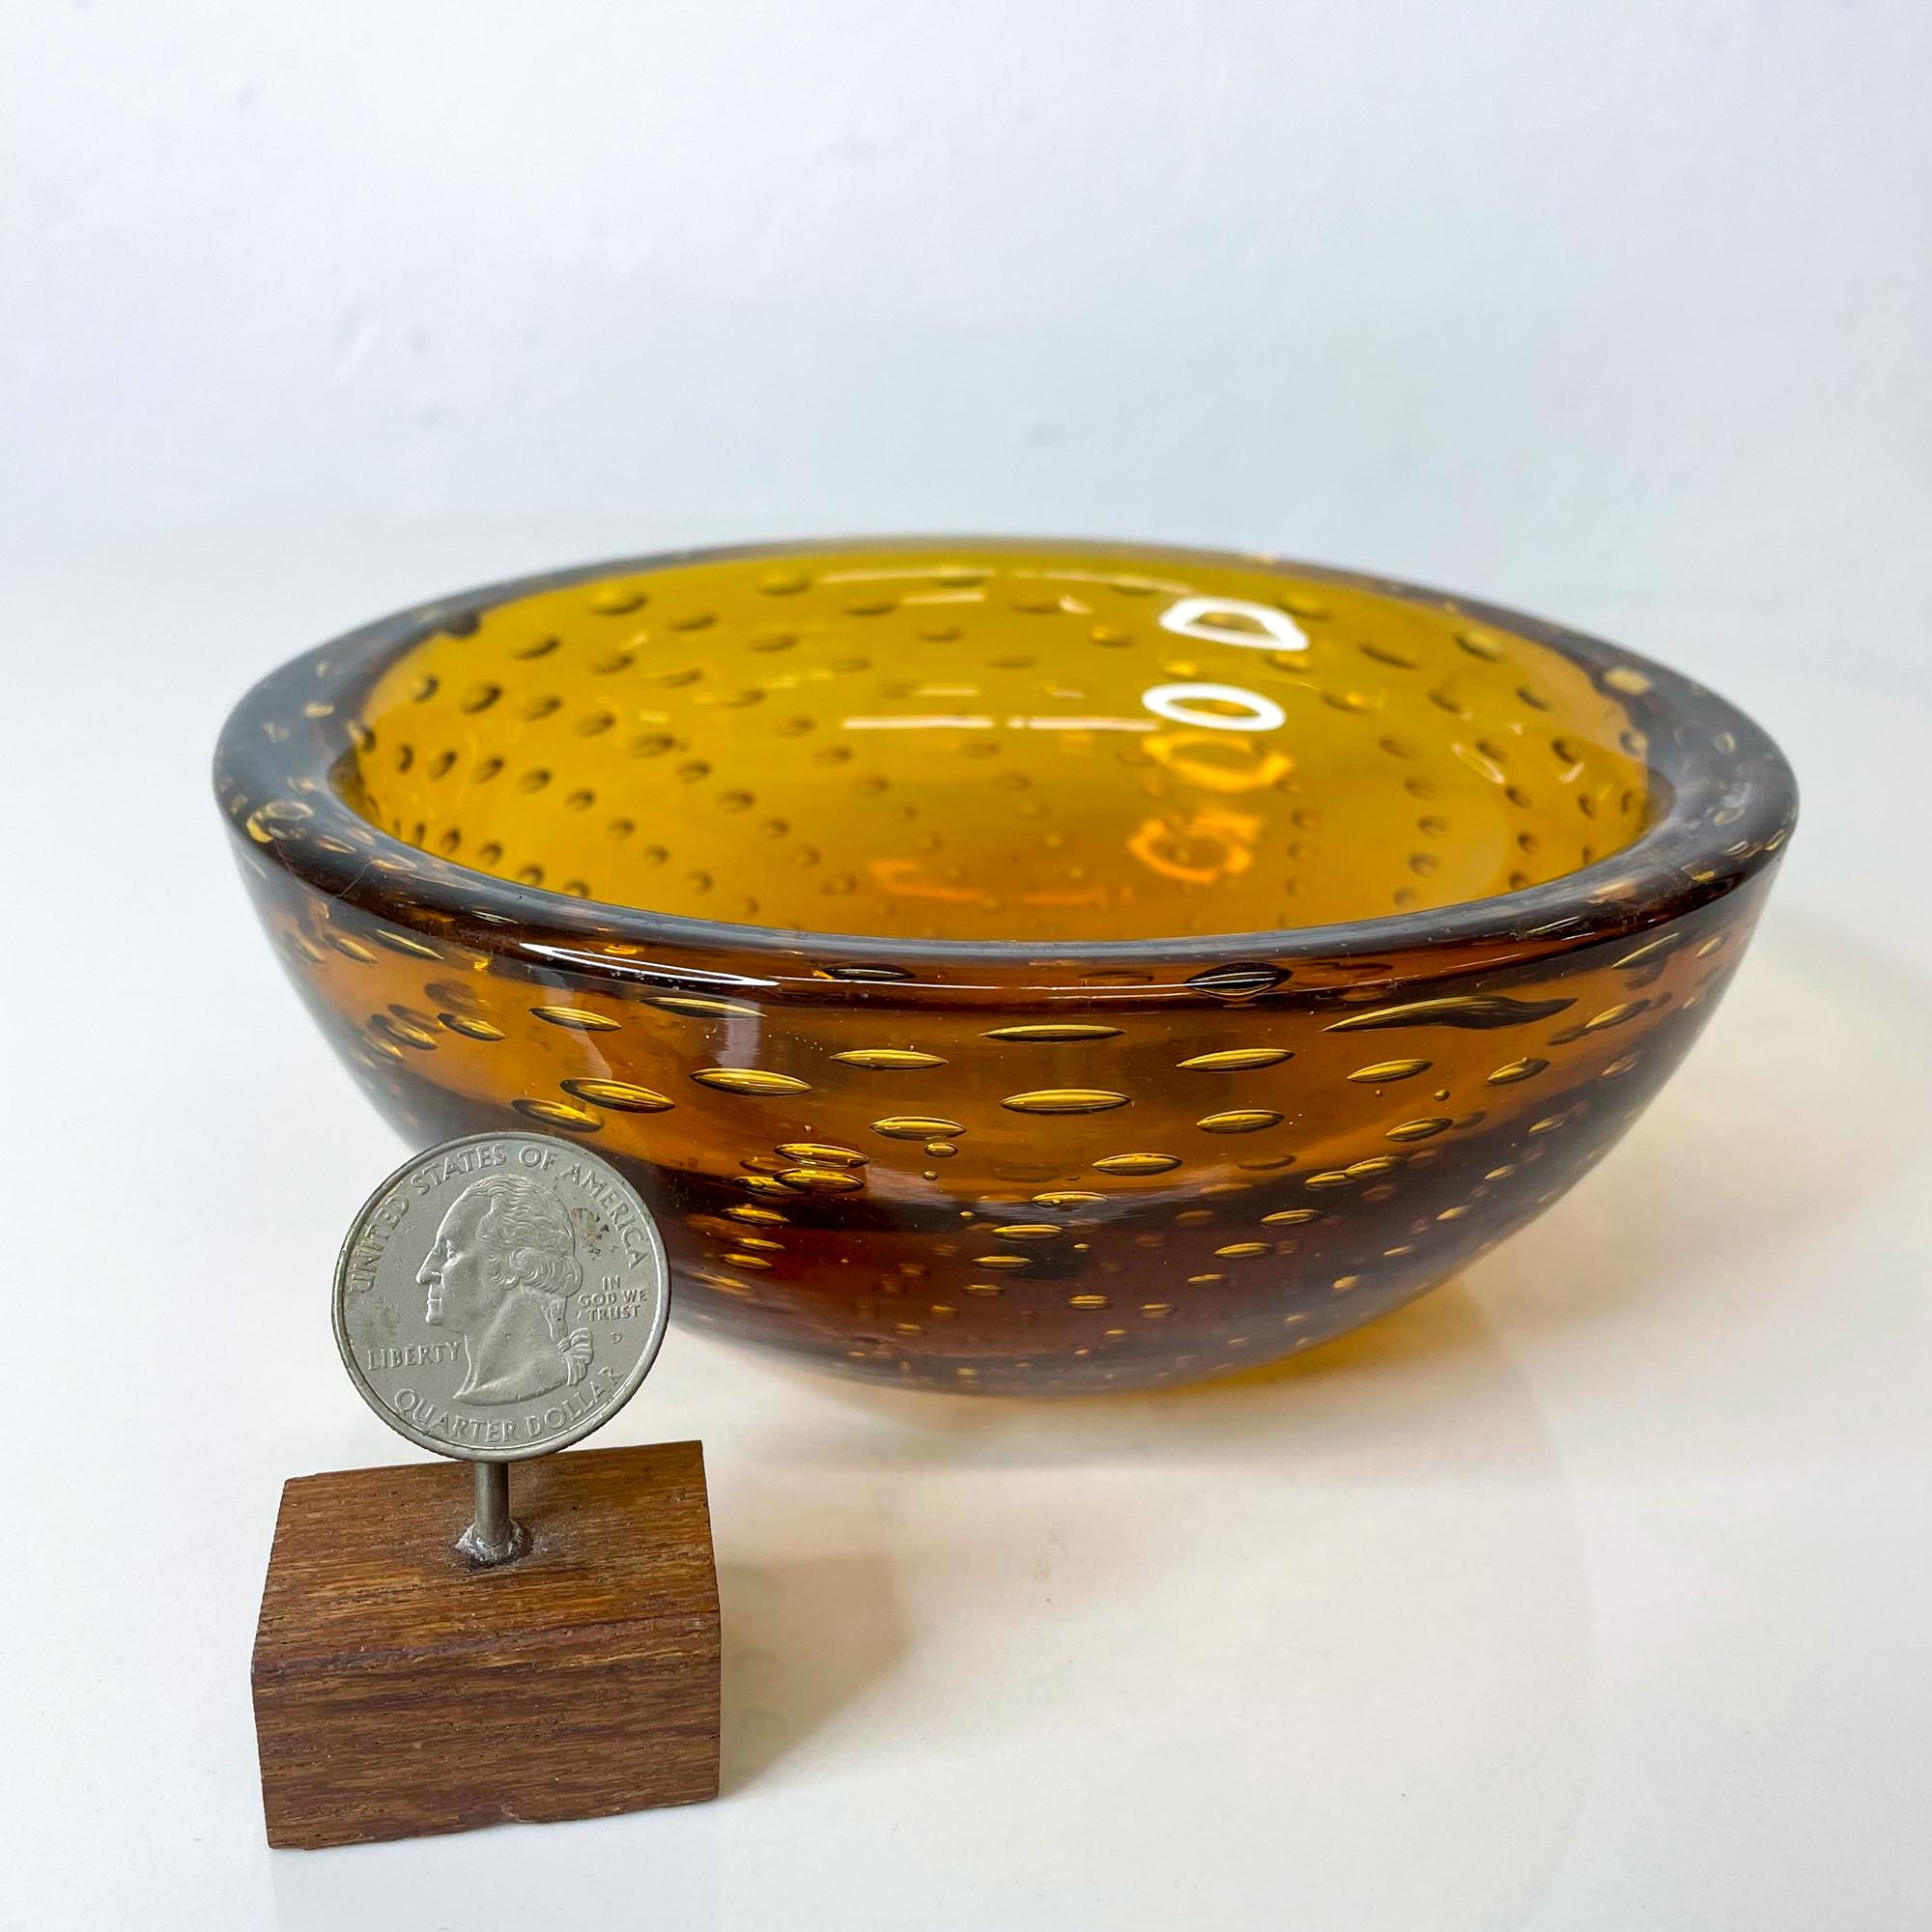 1970s Murano Sommerso Amber Controlled Bubble Art Glass Bowl ITALY
No label.
6.13 diameter x 2.13 tall inches
Amber and Brown tones.
Unrestored preowned vintage good condition.
Please refer to images.
